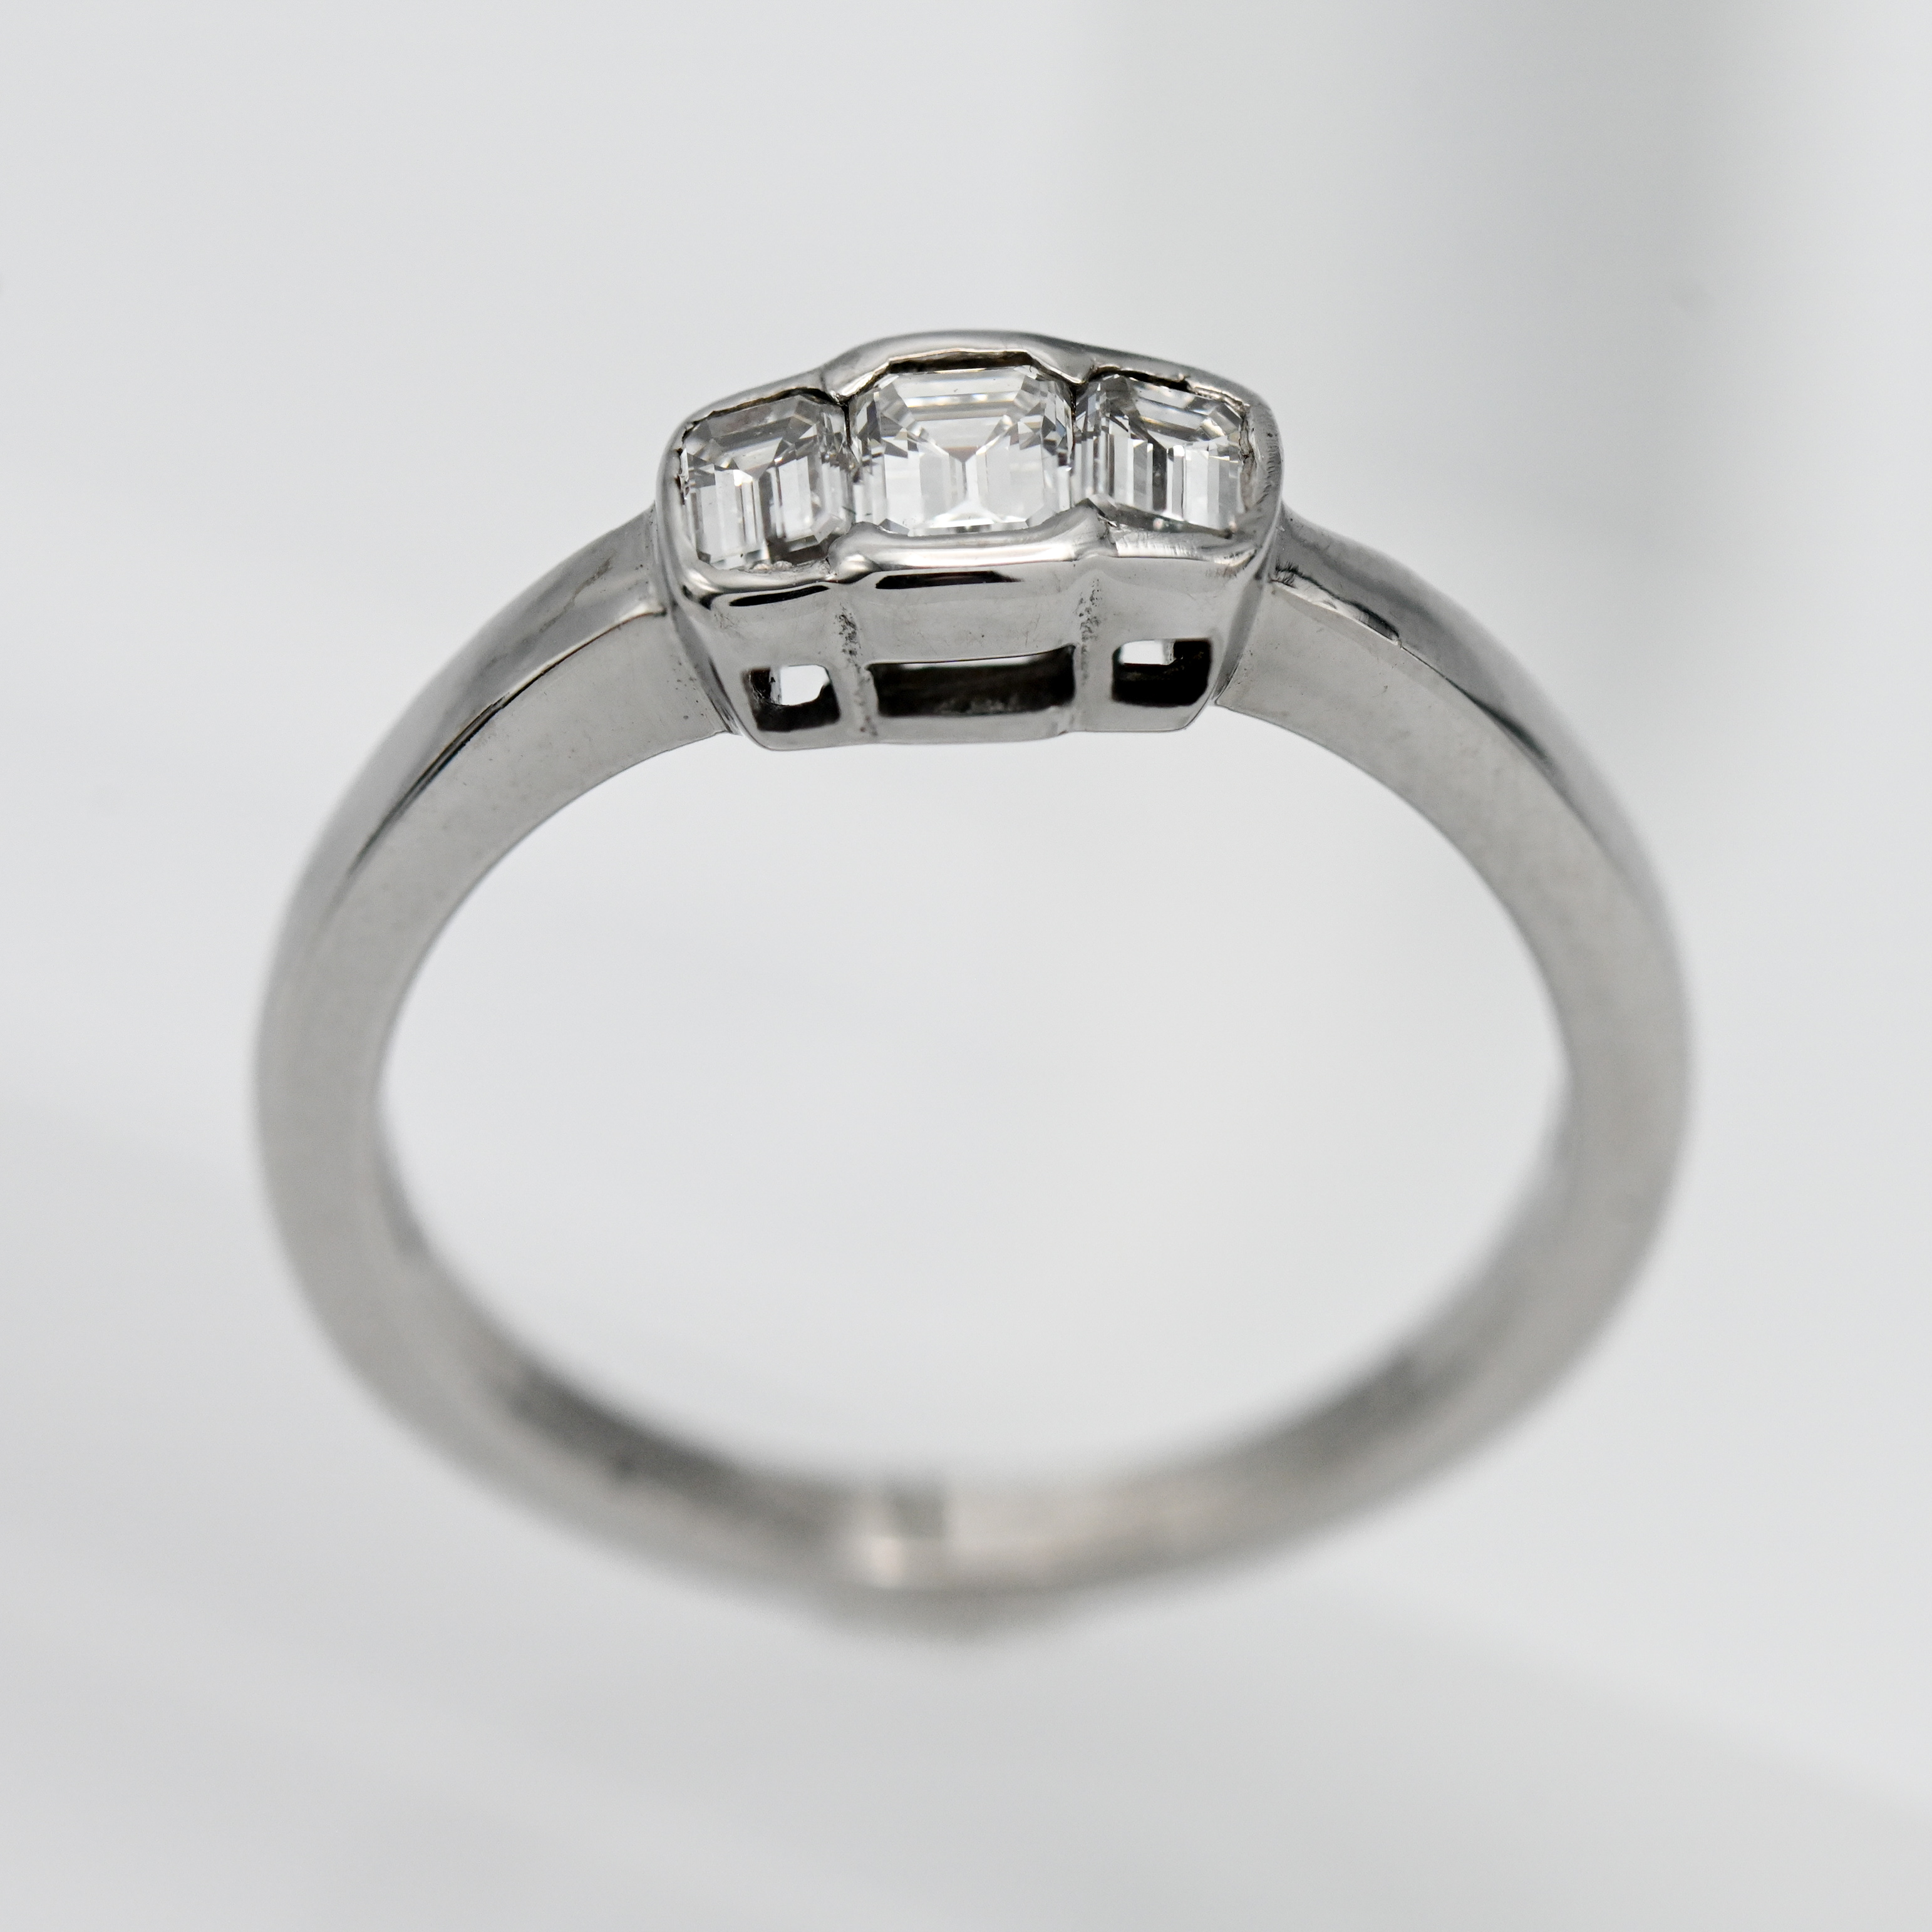 A diamond three stone ring, emerald cut stones, set in 18ct white gold, size M/N.